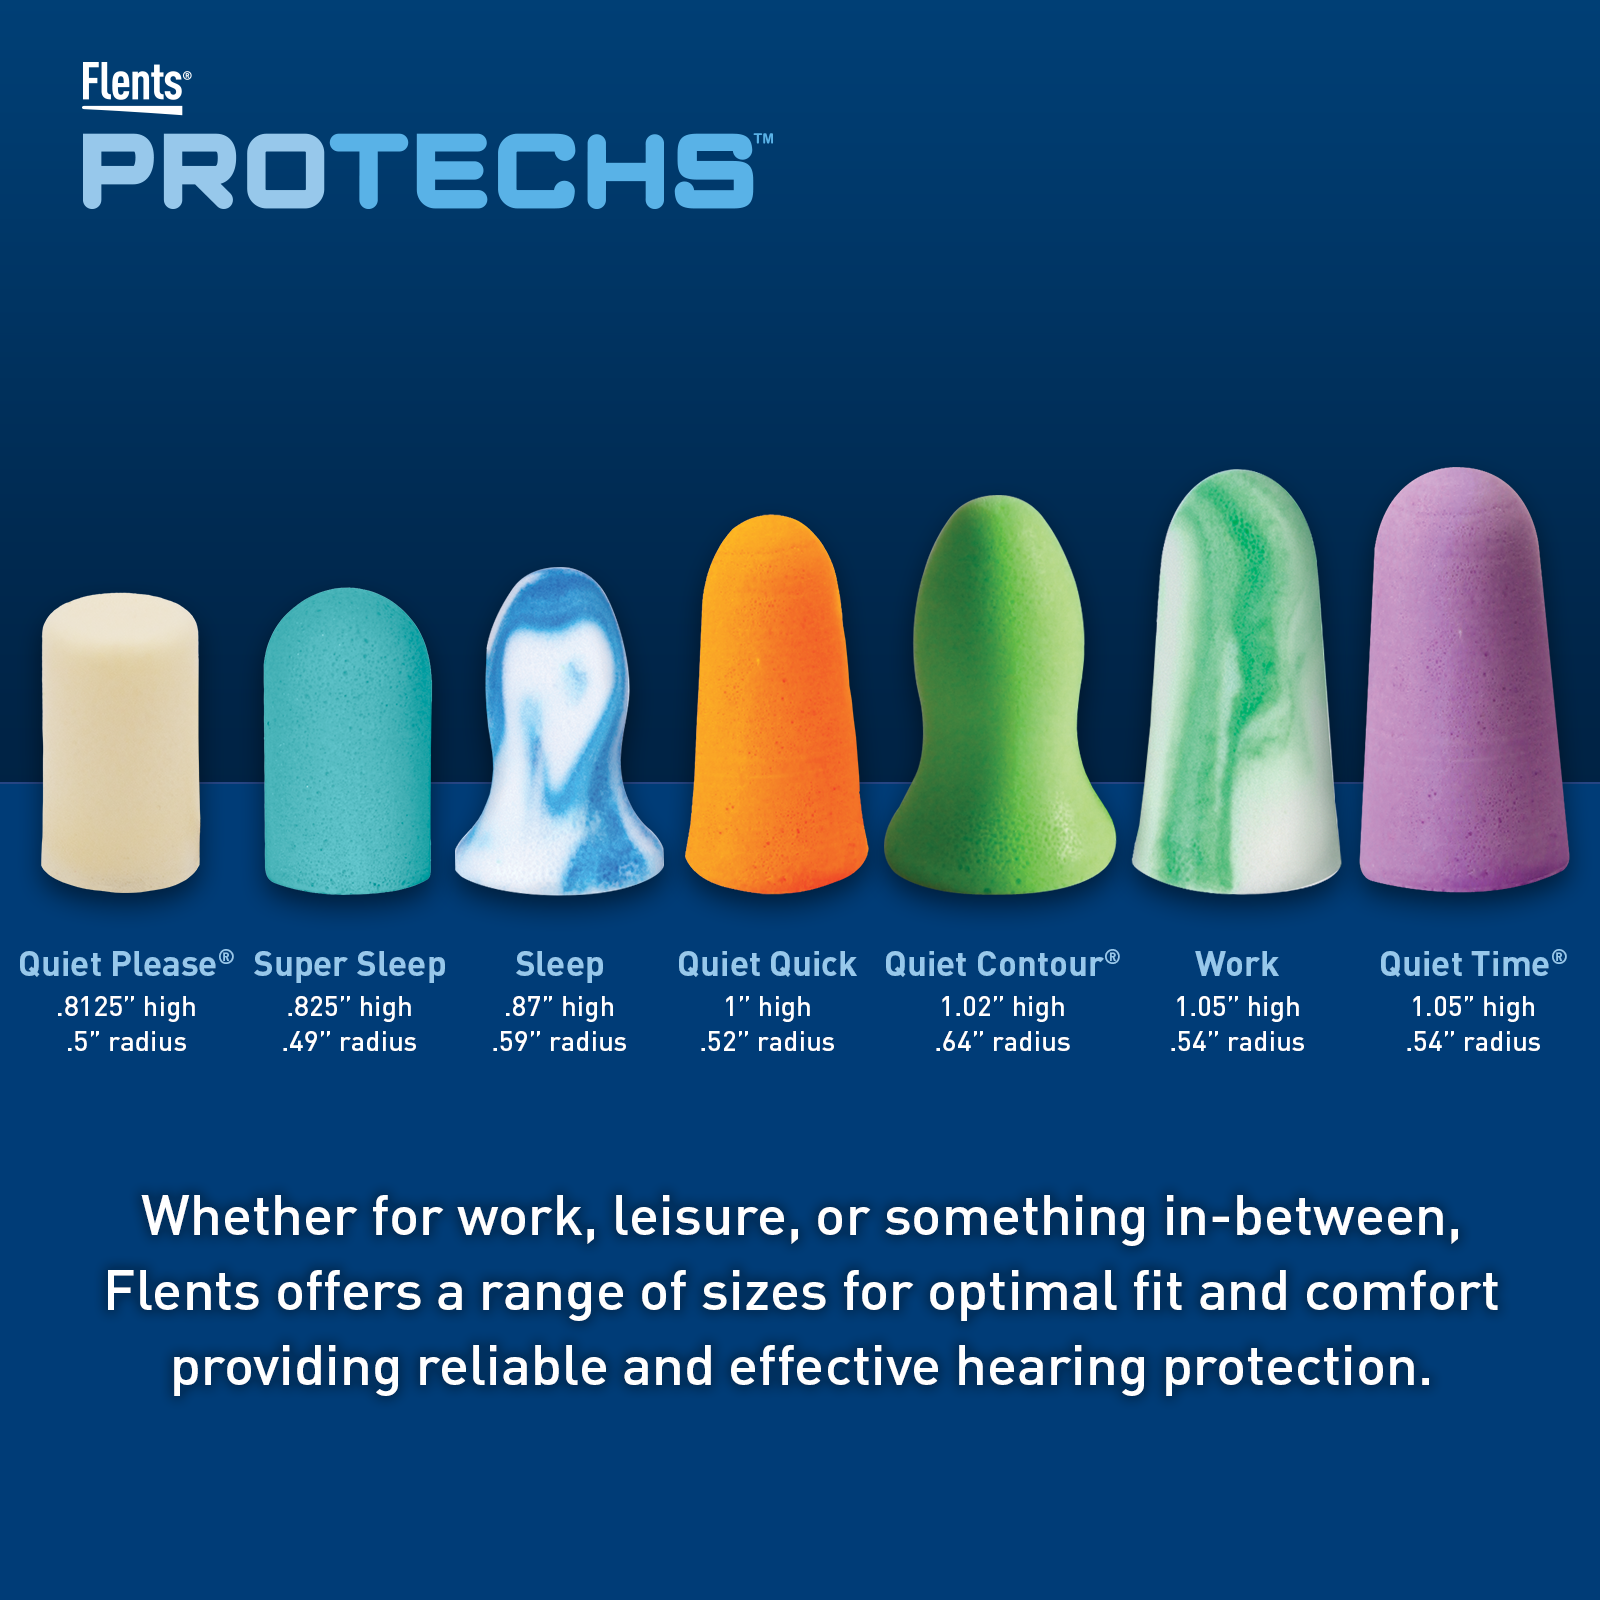 Flents PROTECHS™ Ear Plugs for Sleeping, 30 Pair with Case, NRR 28 - image 4 of 7